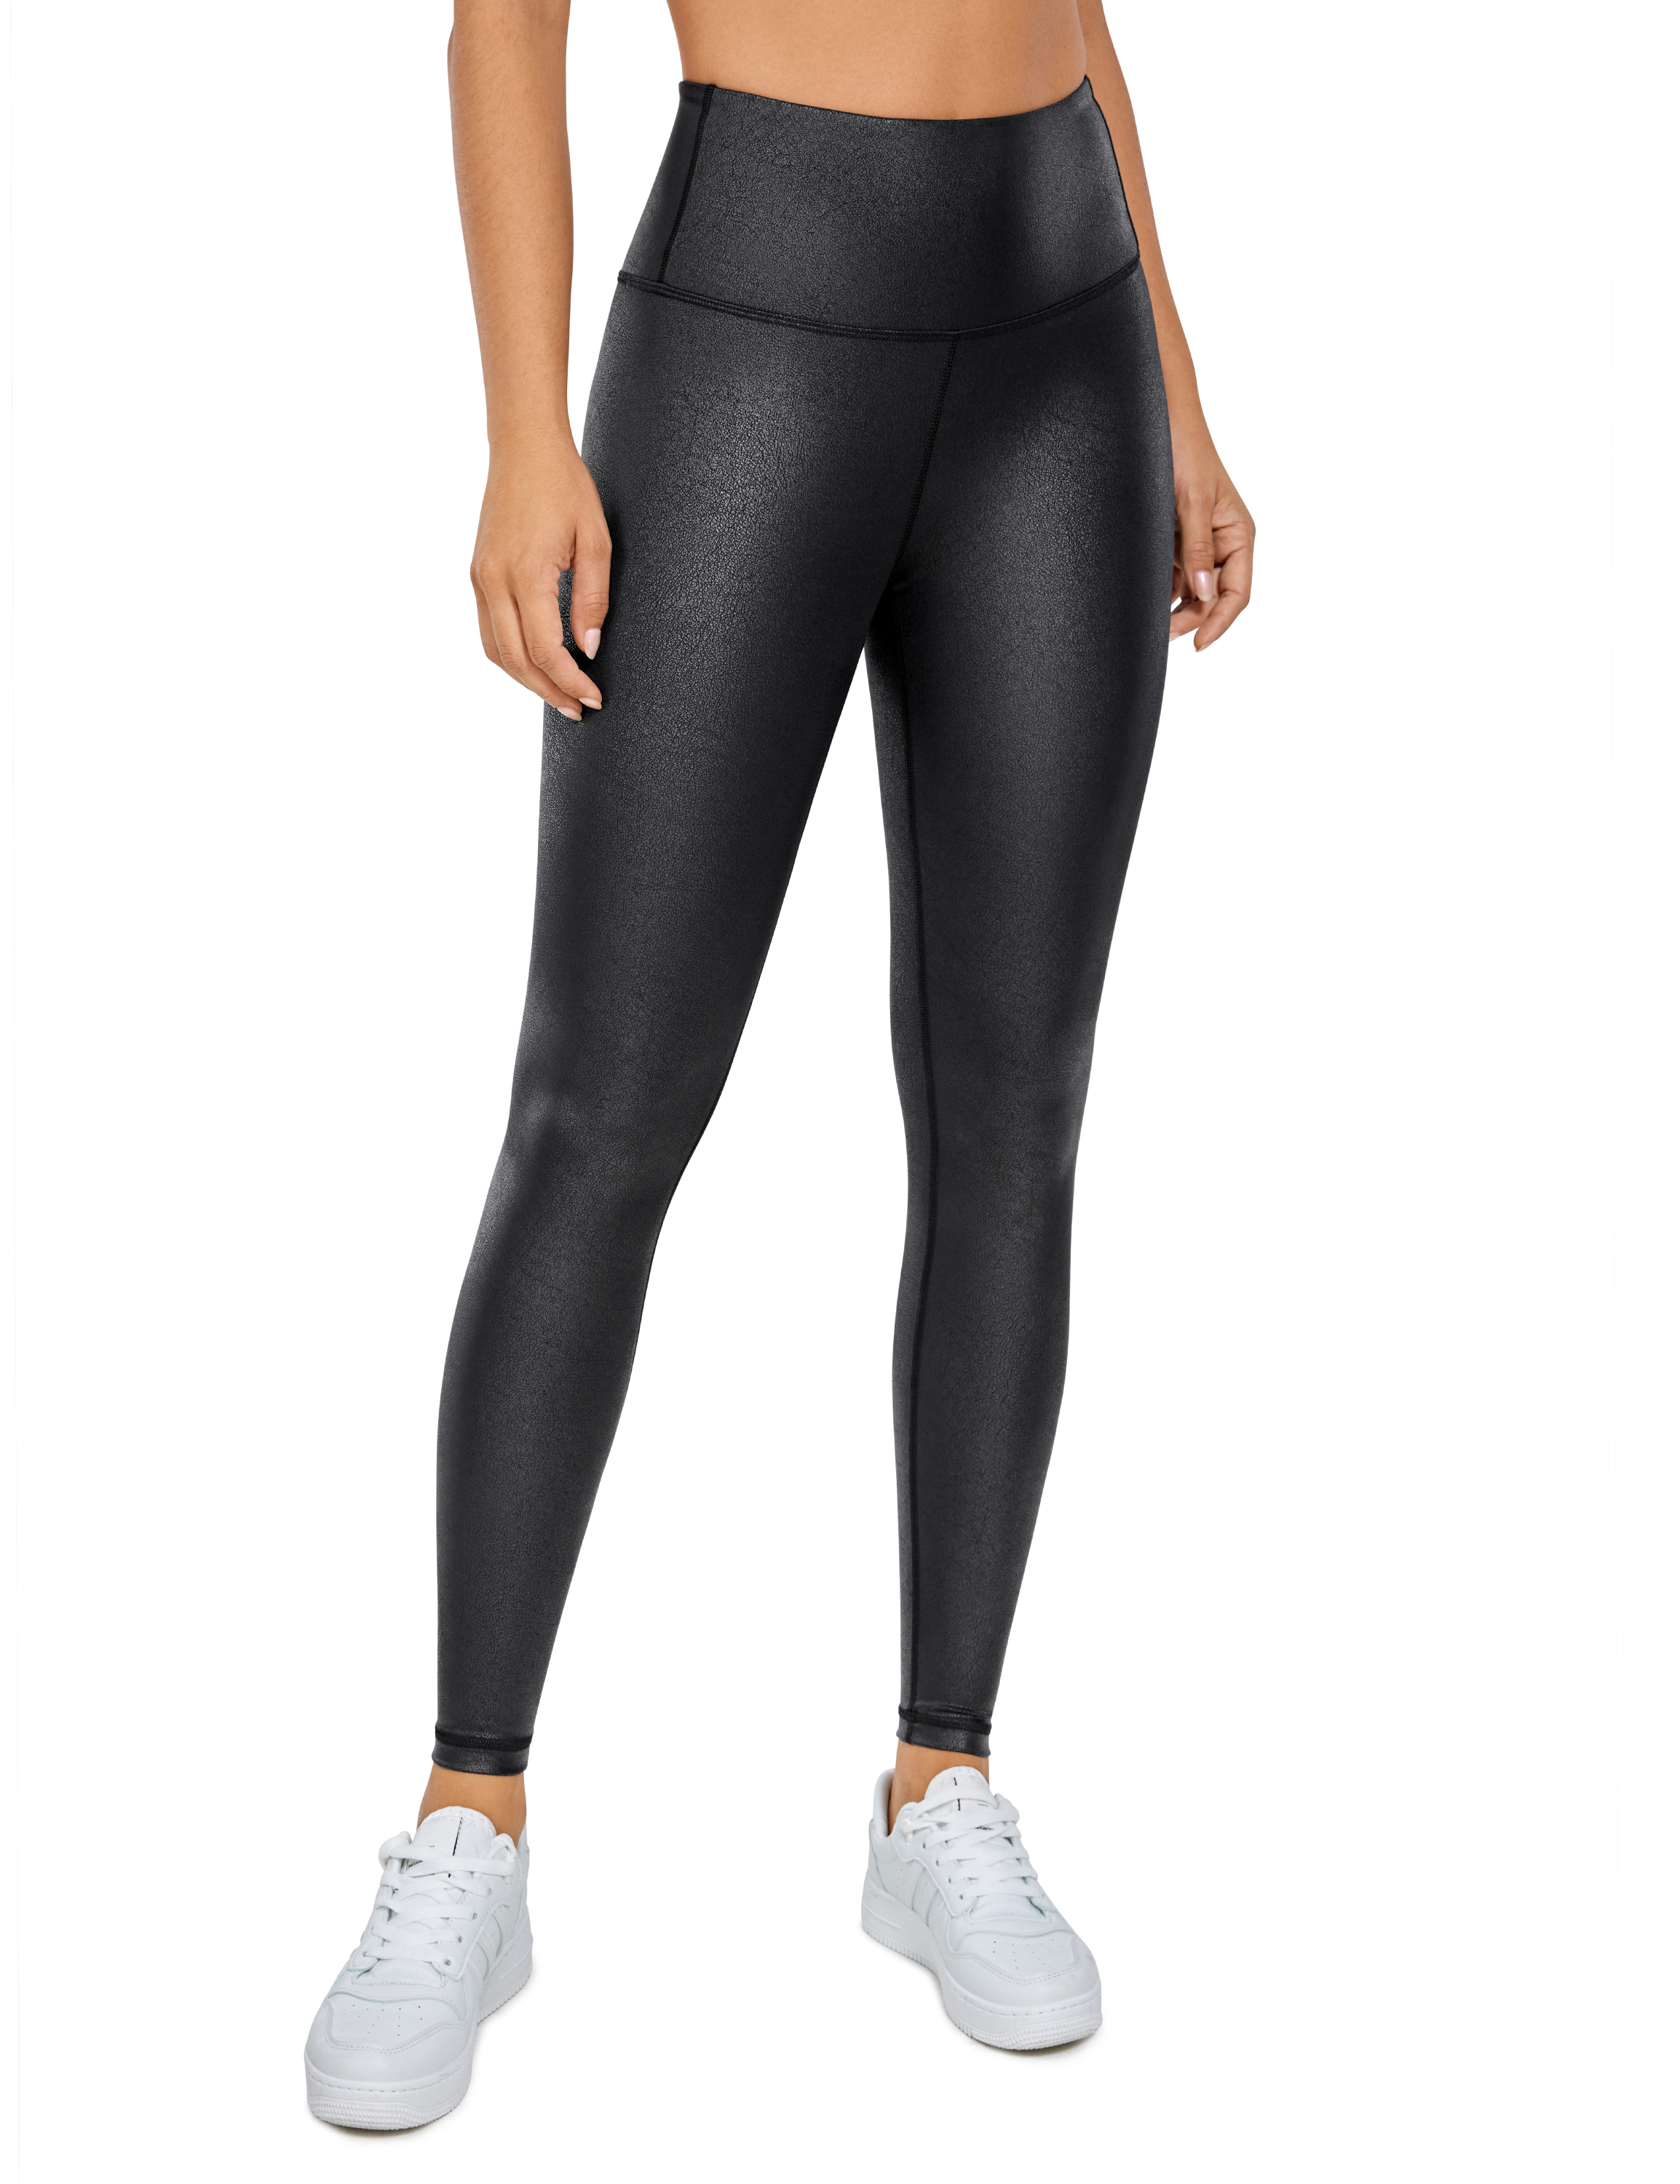 CRZ YOGA Matte Faux Leather Leggings for Women 28 inches High Waisted  Stretch